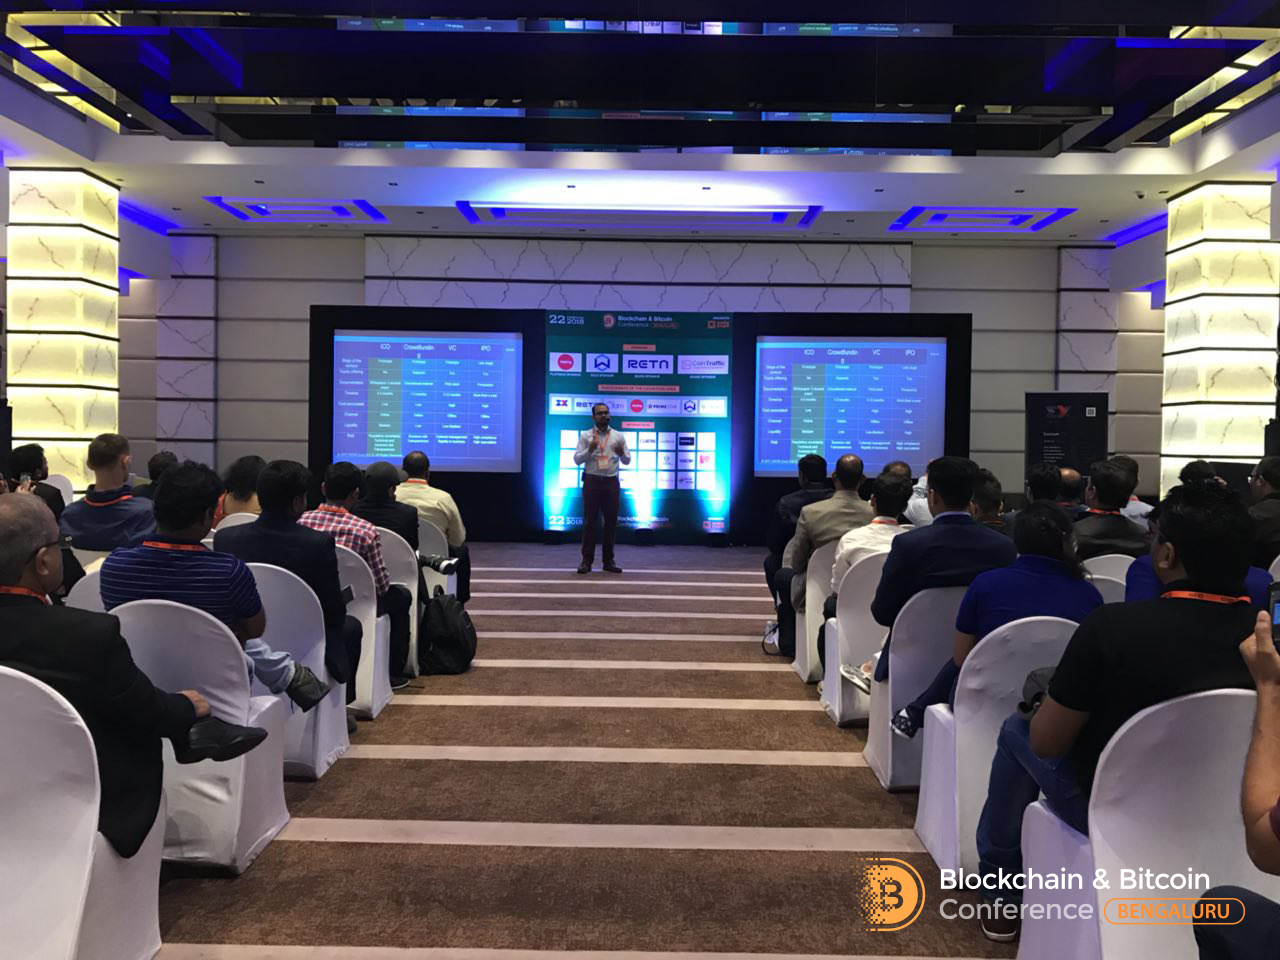 Blockchain & Bitcoin Conference Bengaluru discussed new laws in India that might touch ICO and blockchain - 2